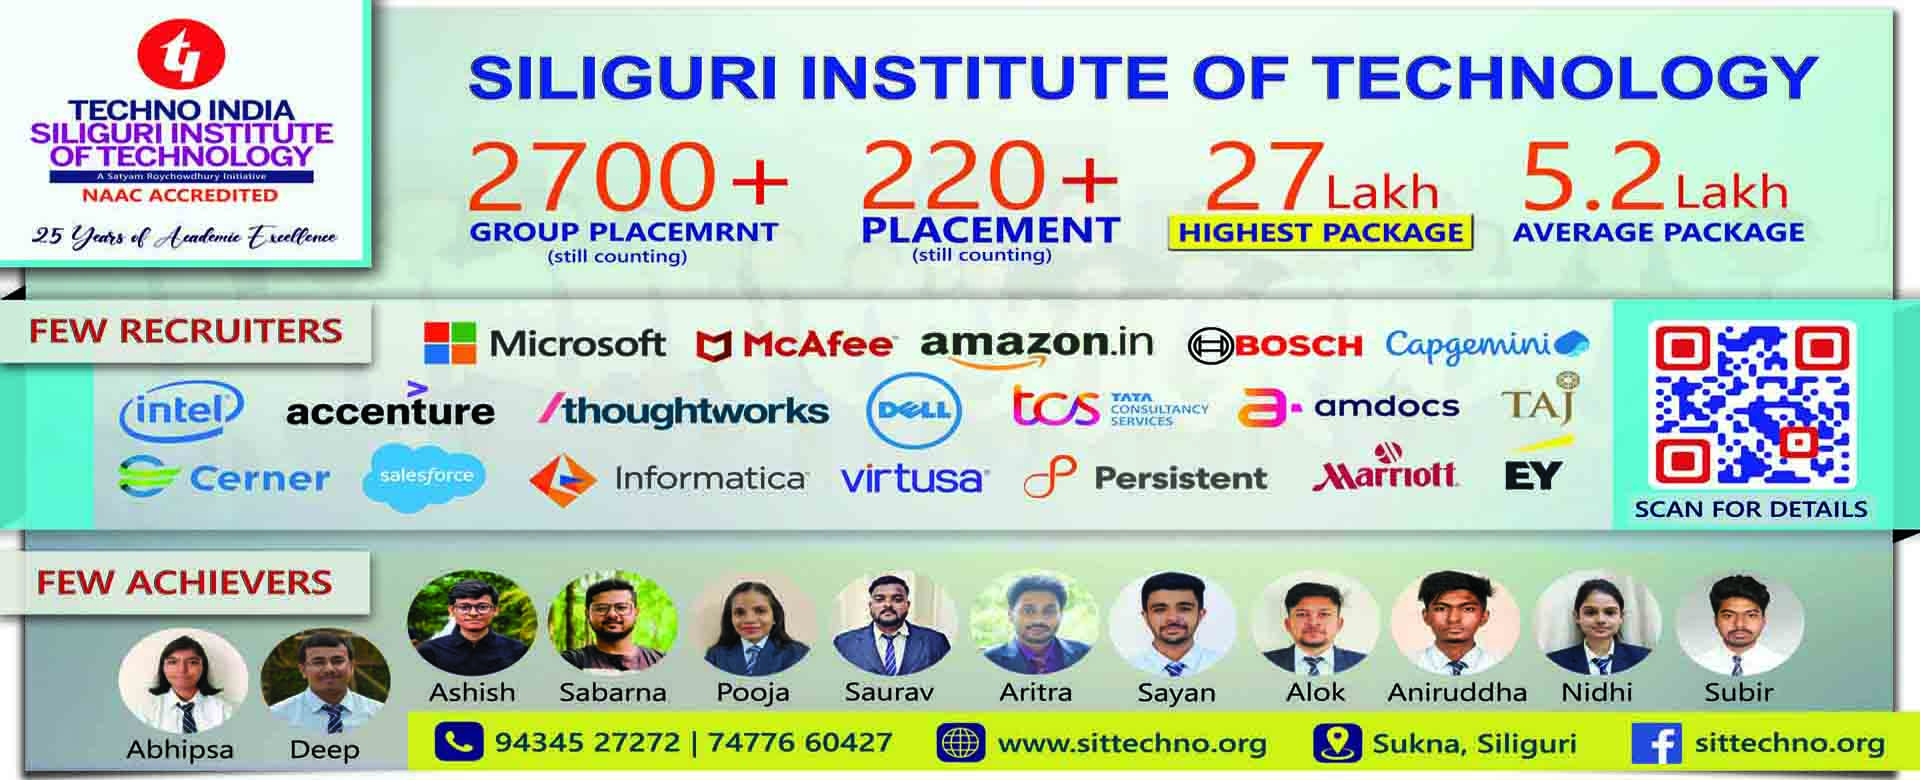 Welcome to Siliguri Institute of Technology (SIT)